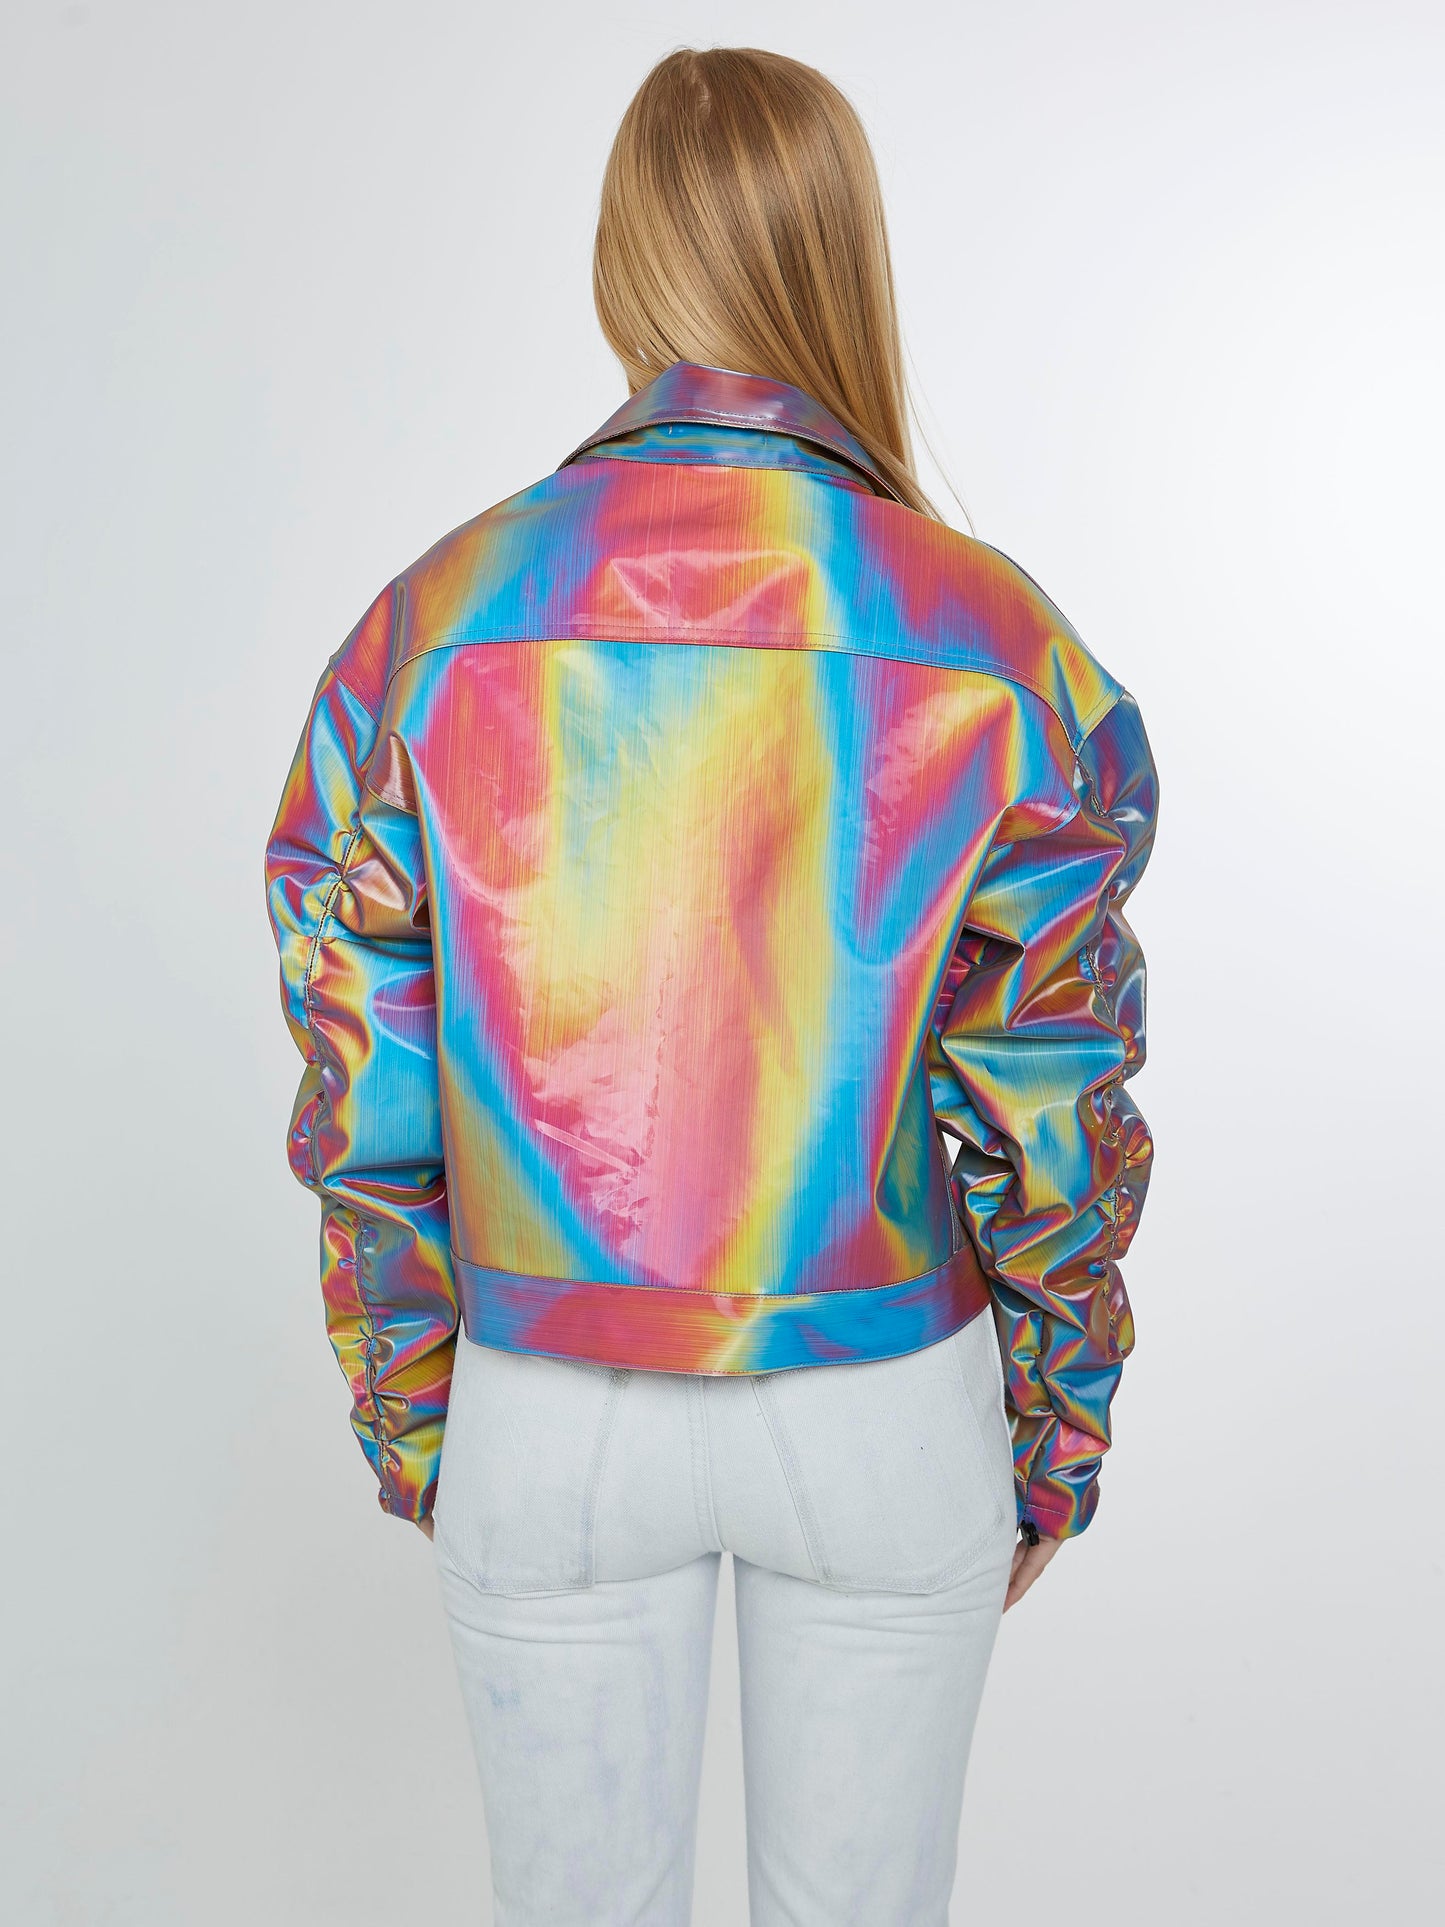 Rainbow jacket with rushed sleeves